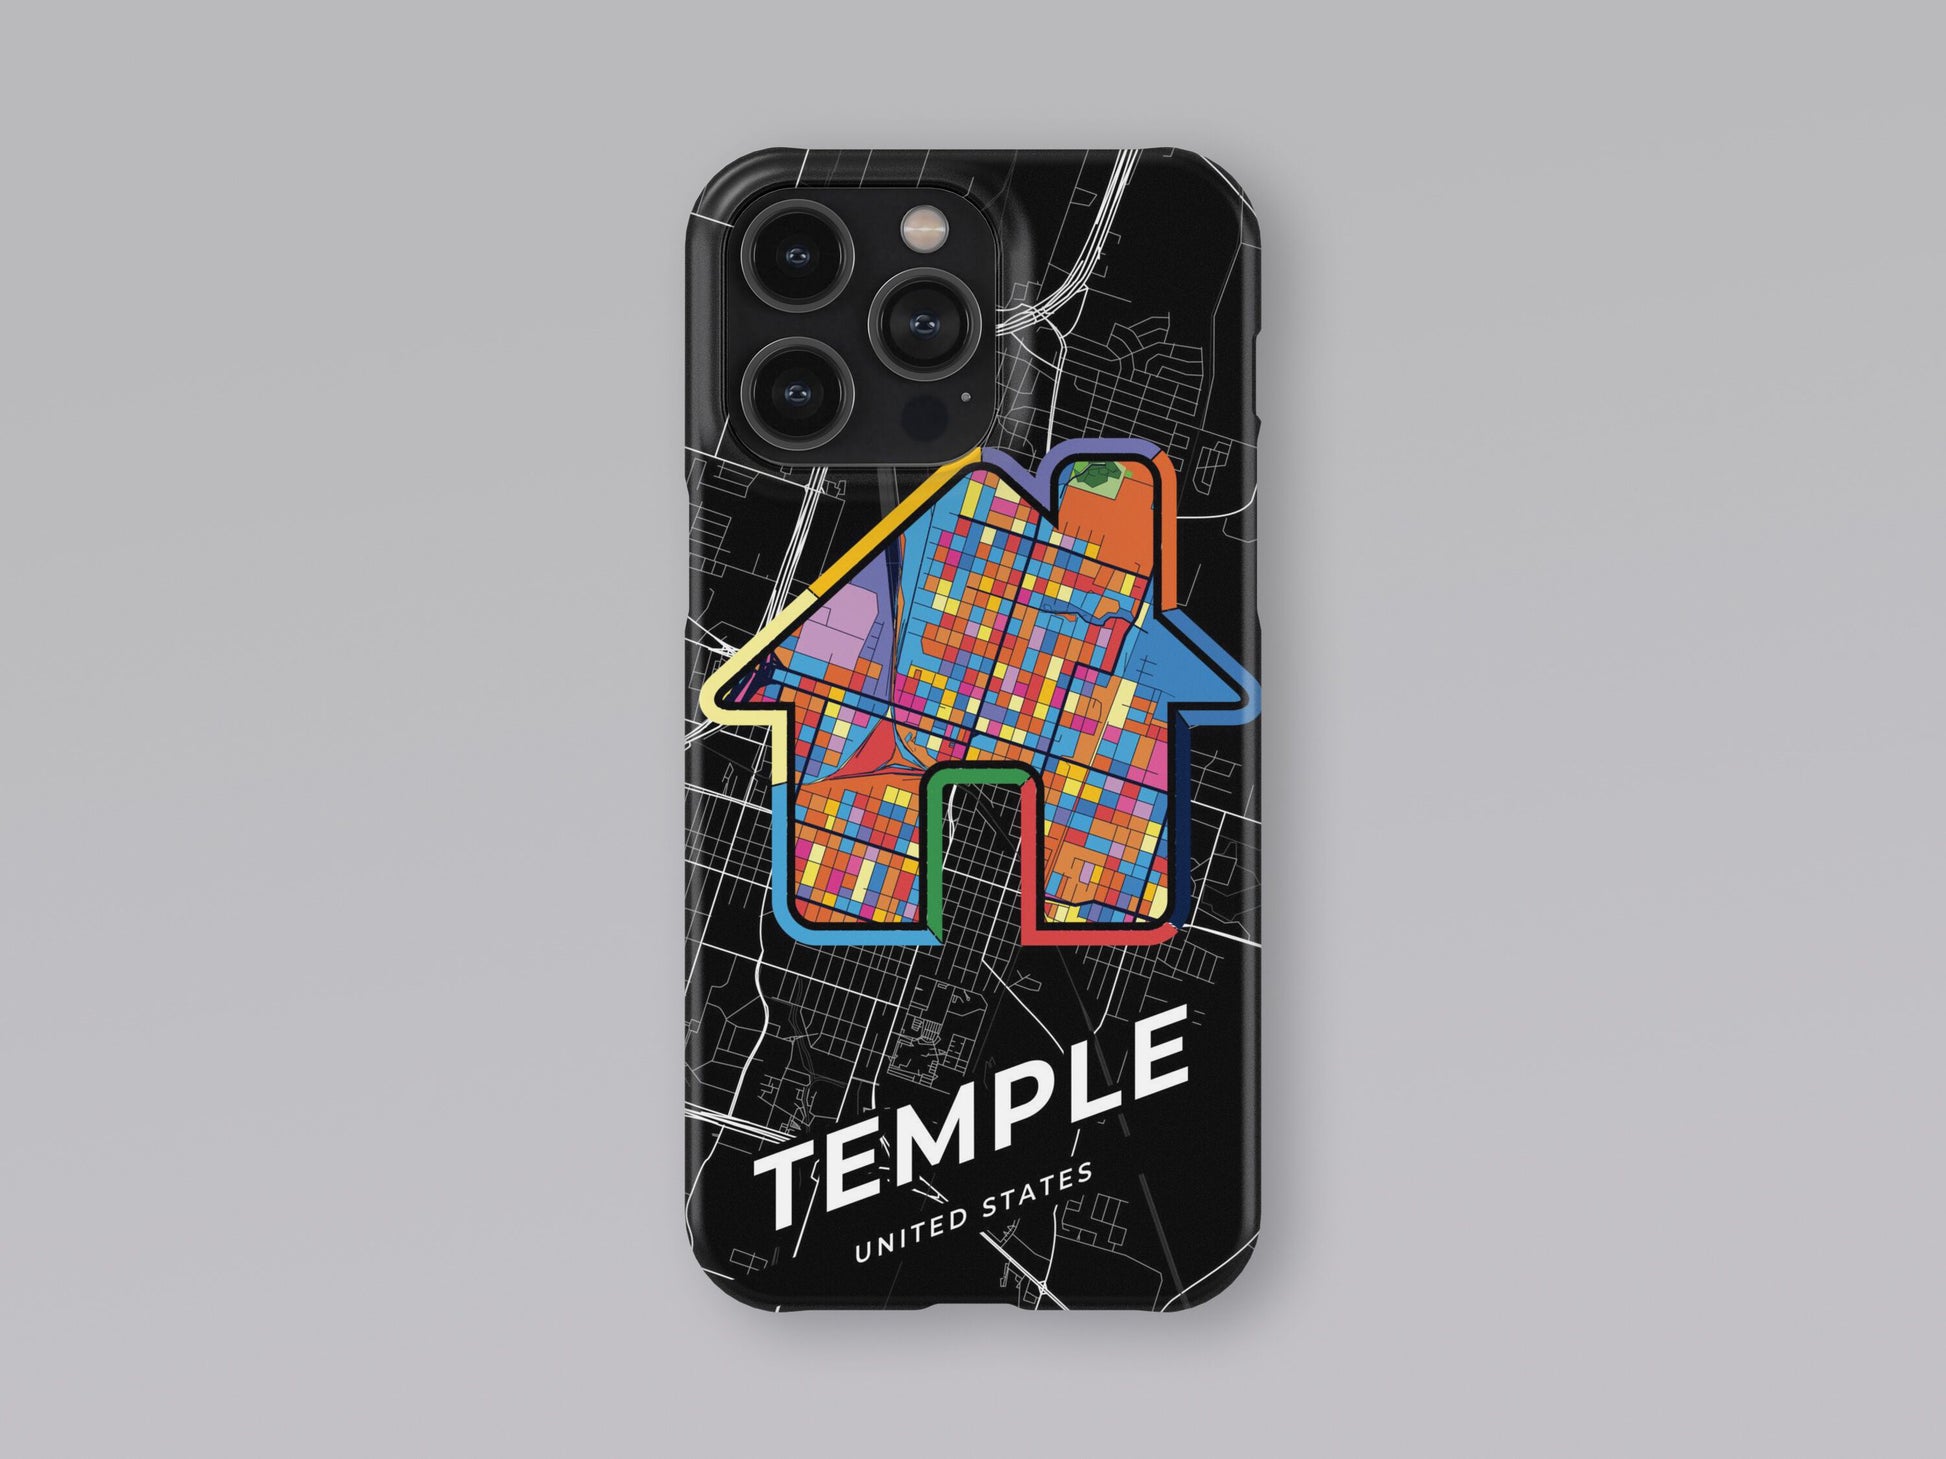 Temple Texas slim phone case with colorful icon 3